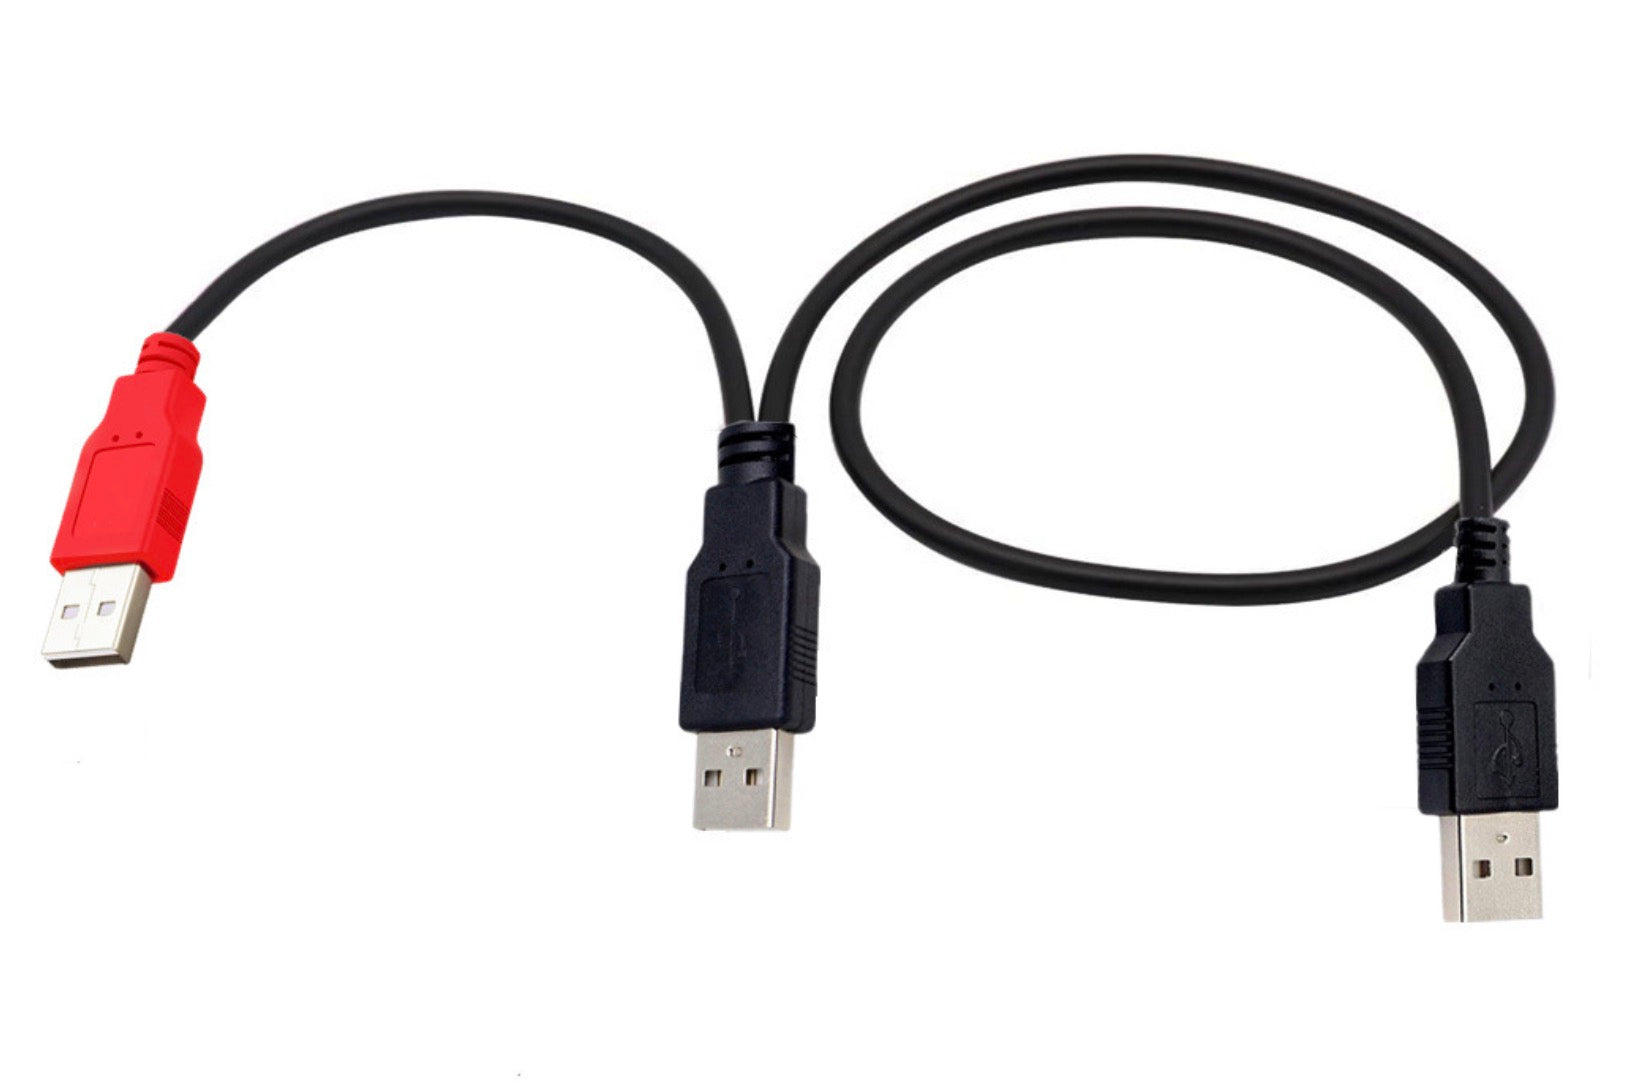 USB 2.0 A Male to Dual USB 2.0 A Male Y Splitter Cable with Extra Power Connector 0.8m